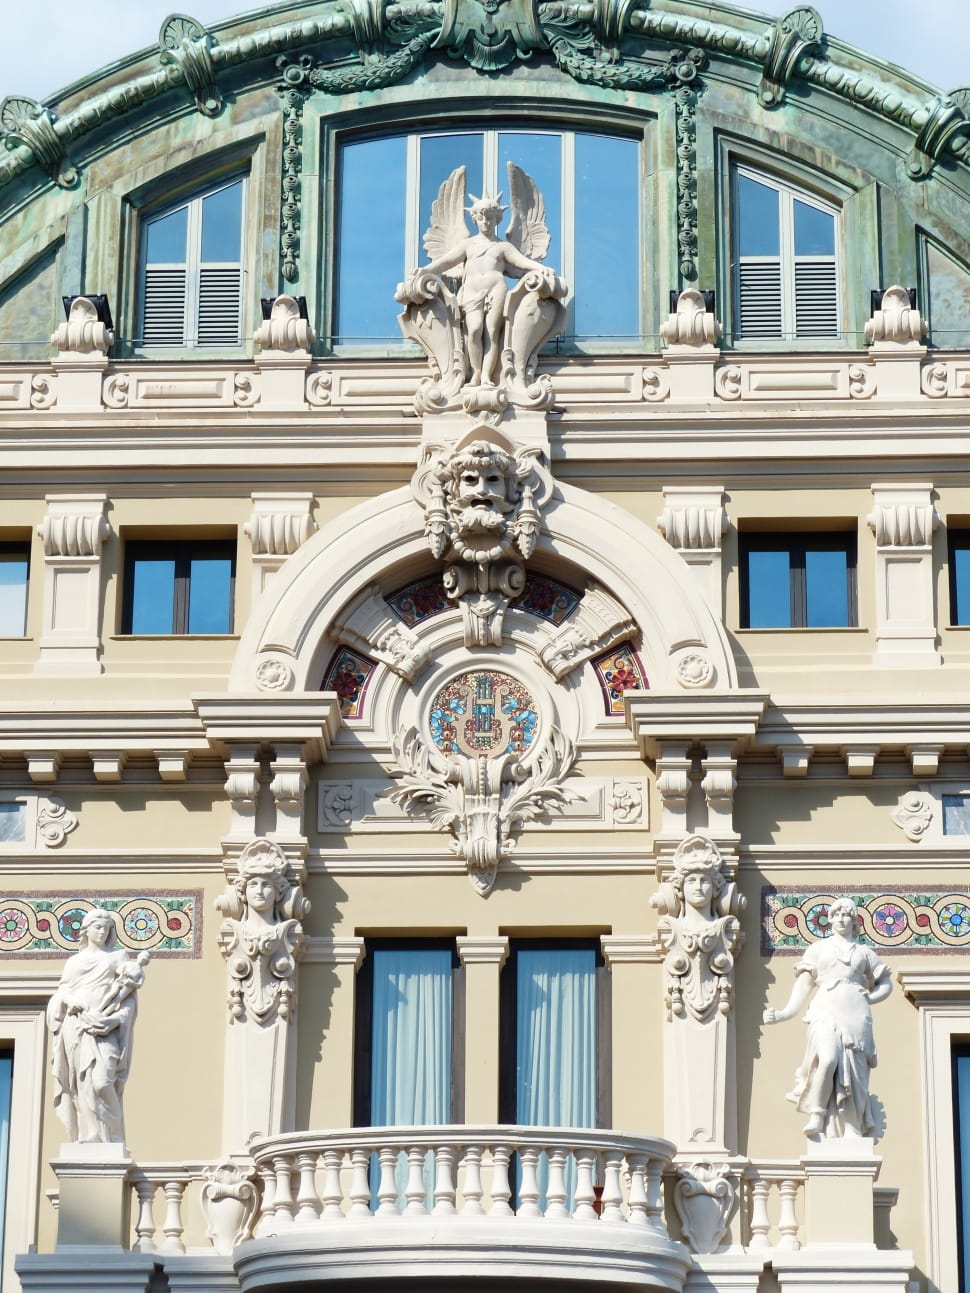 Facade, Game Bank, Casino, Monte Carlo, architecture, low angle view preview